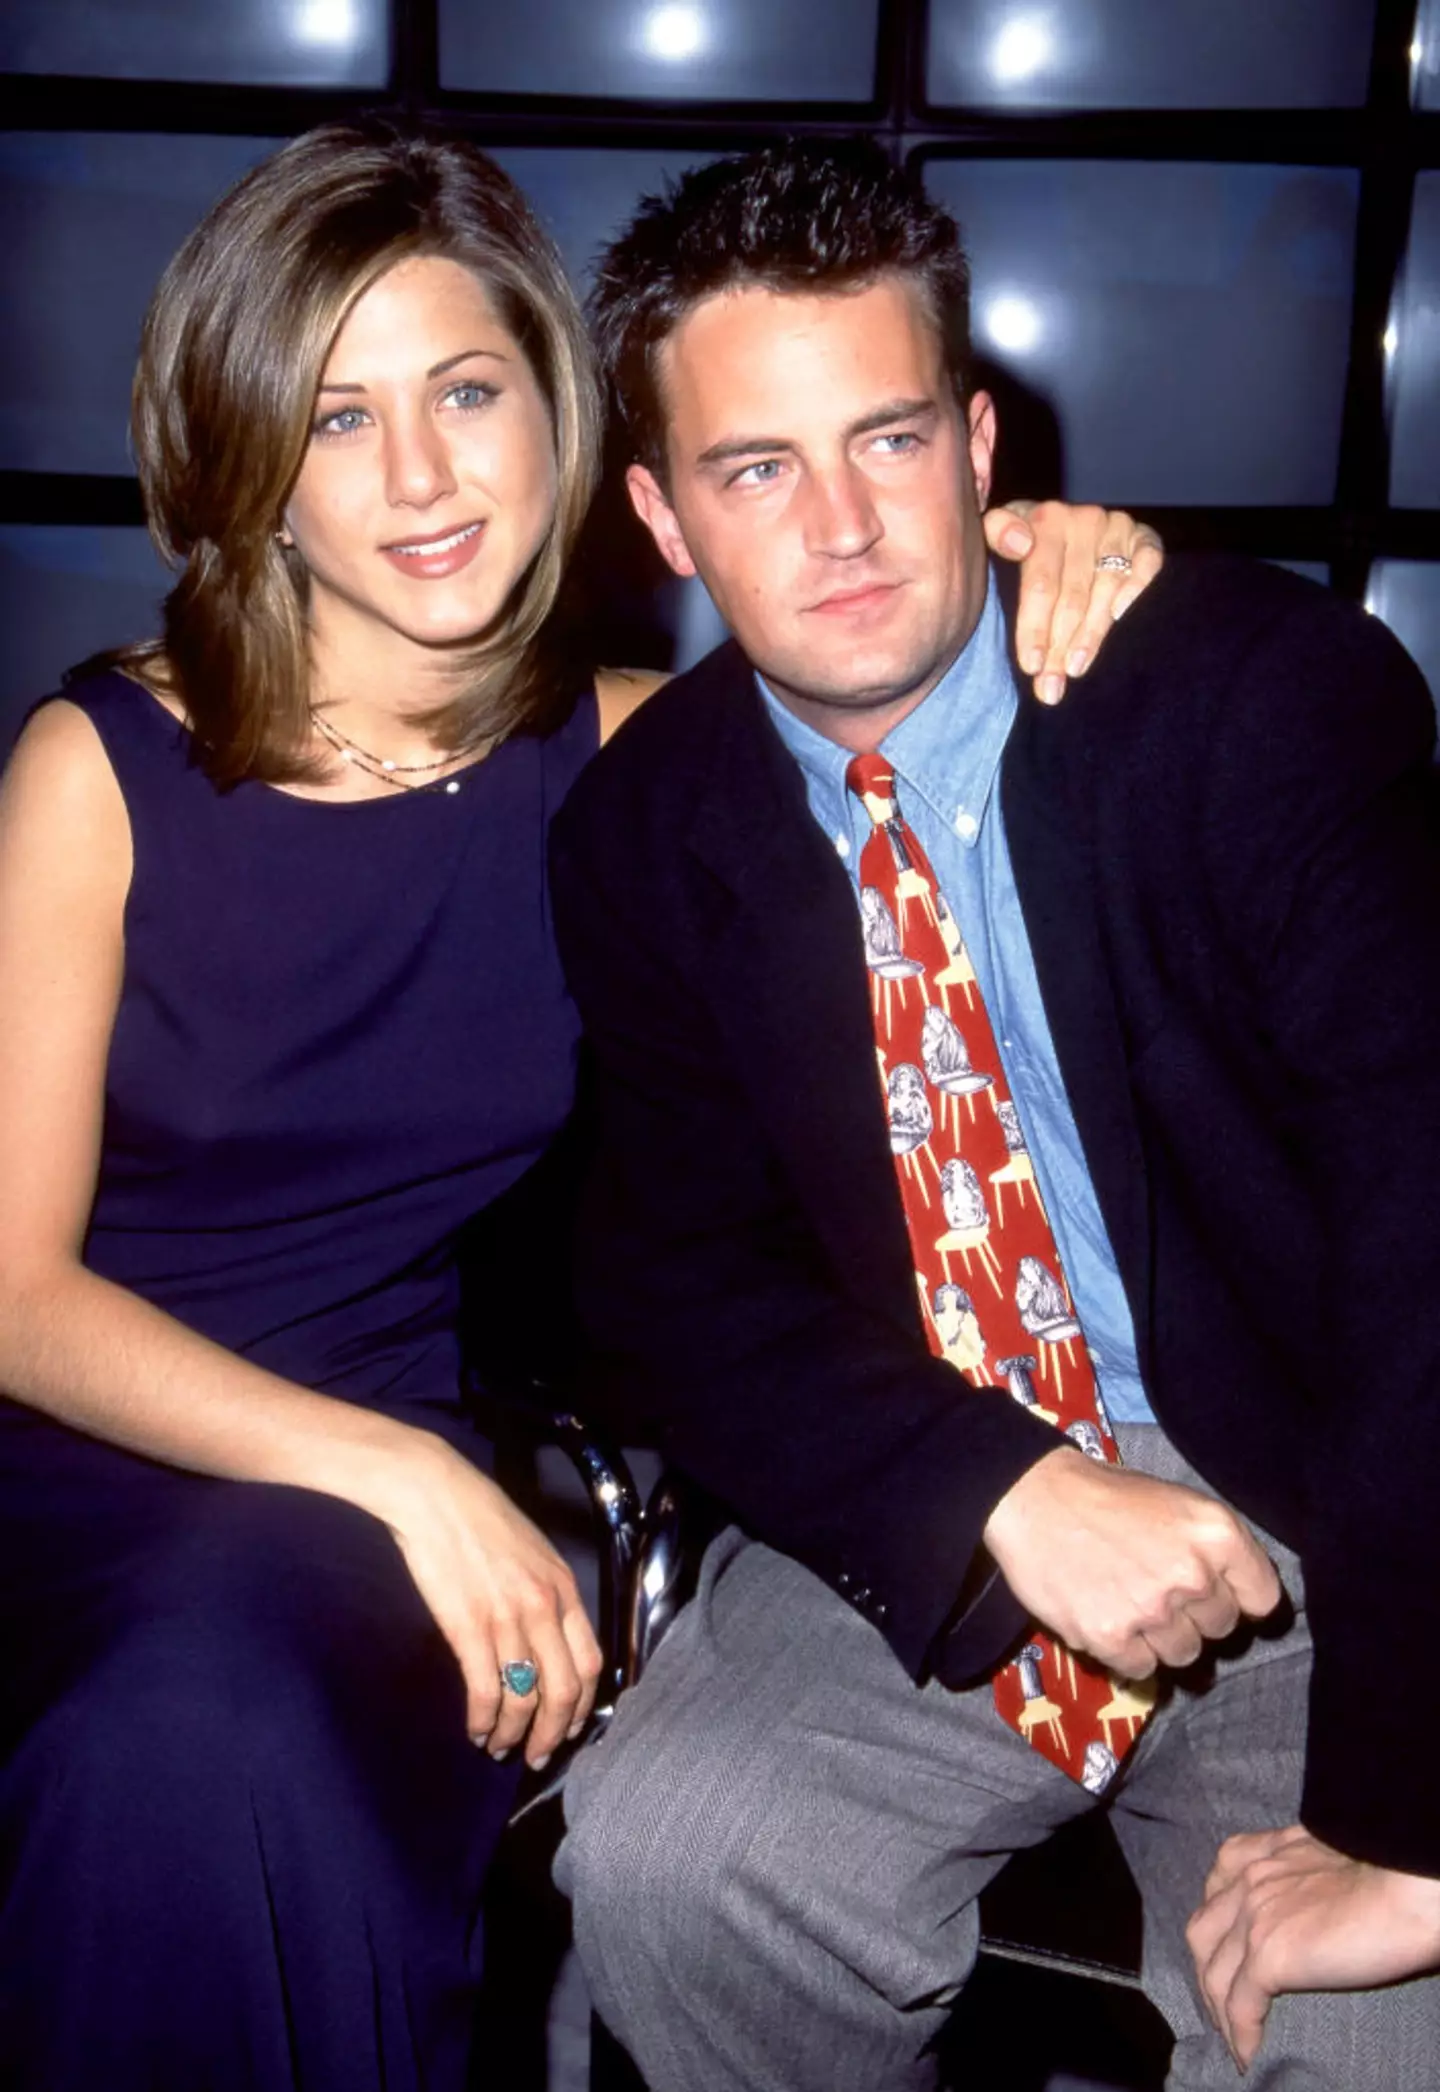 Matthew Perry and Jennifer Aniston, who are best known for their roles on Friends.